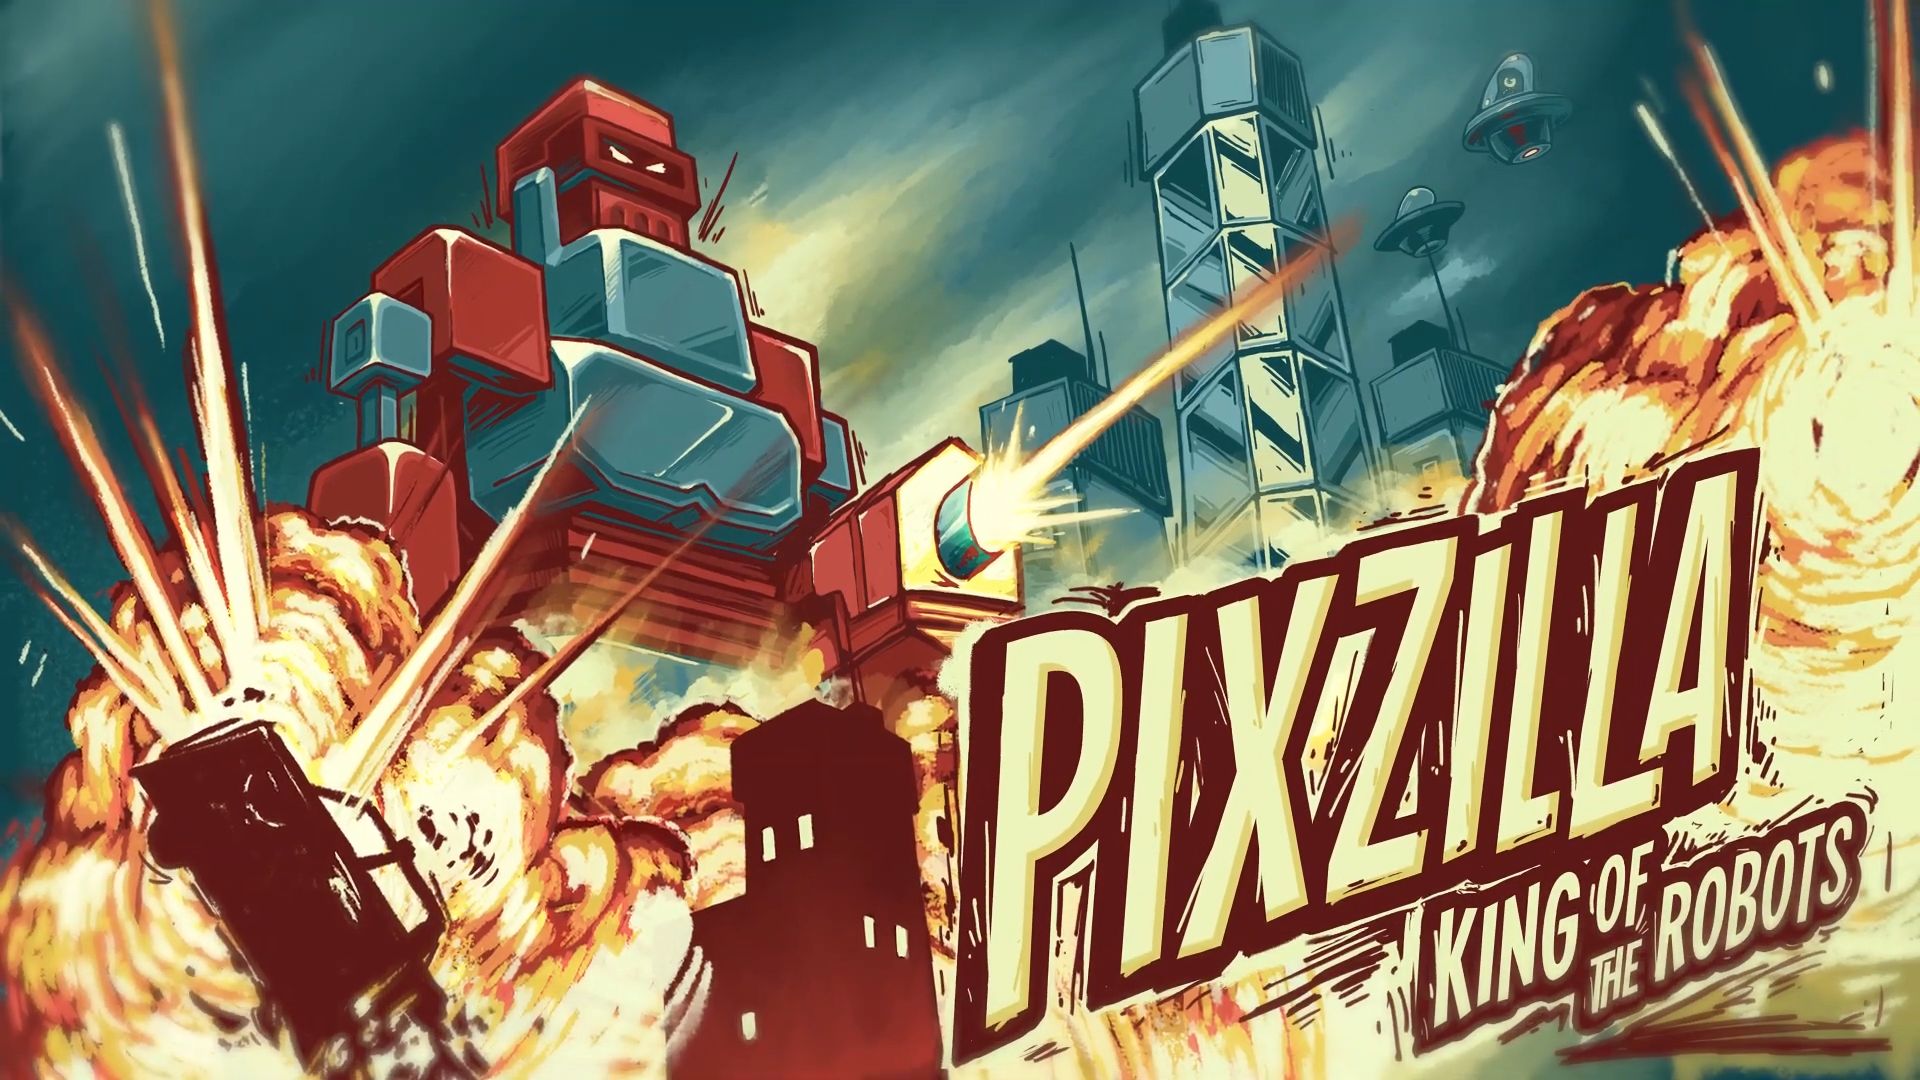 Download Pixzilla / King of the Robots Android free game.